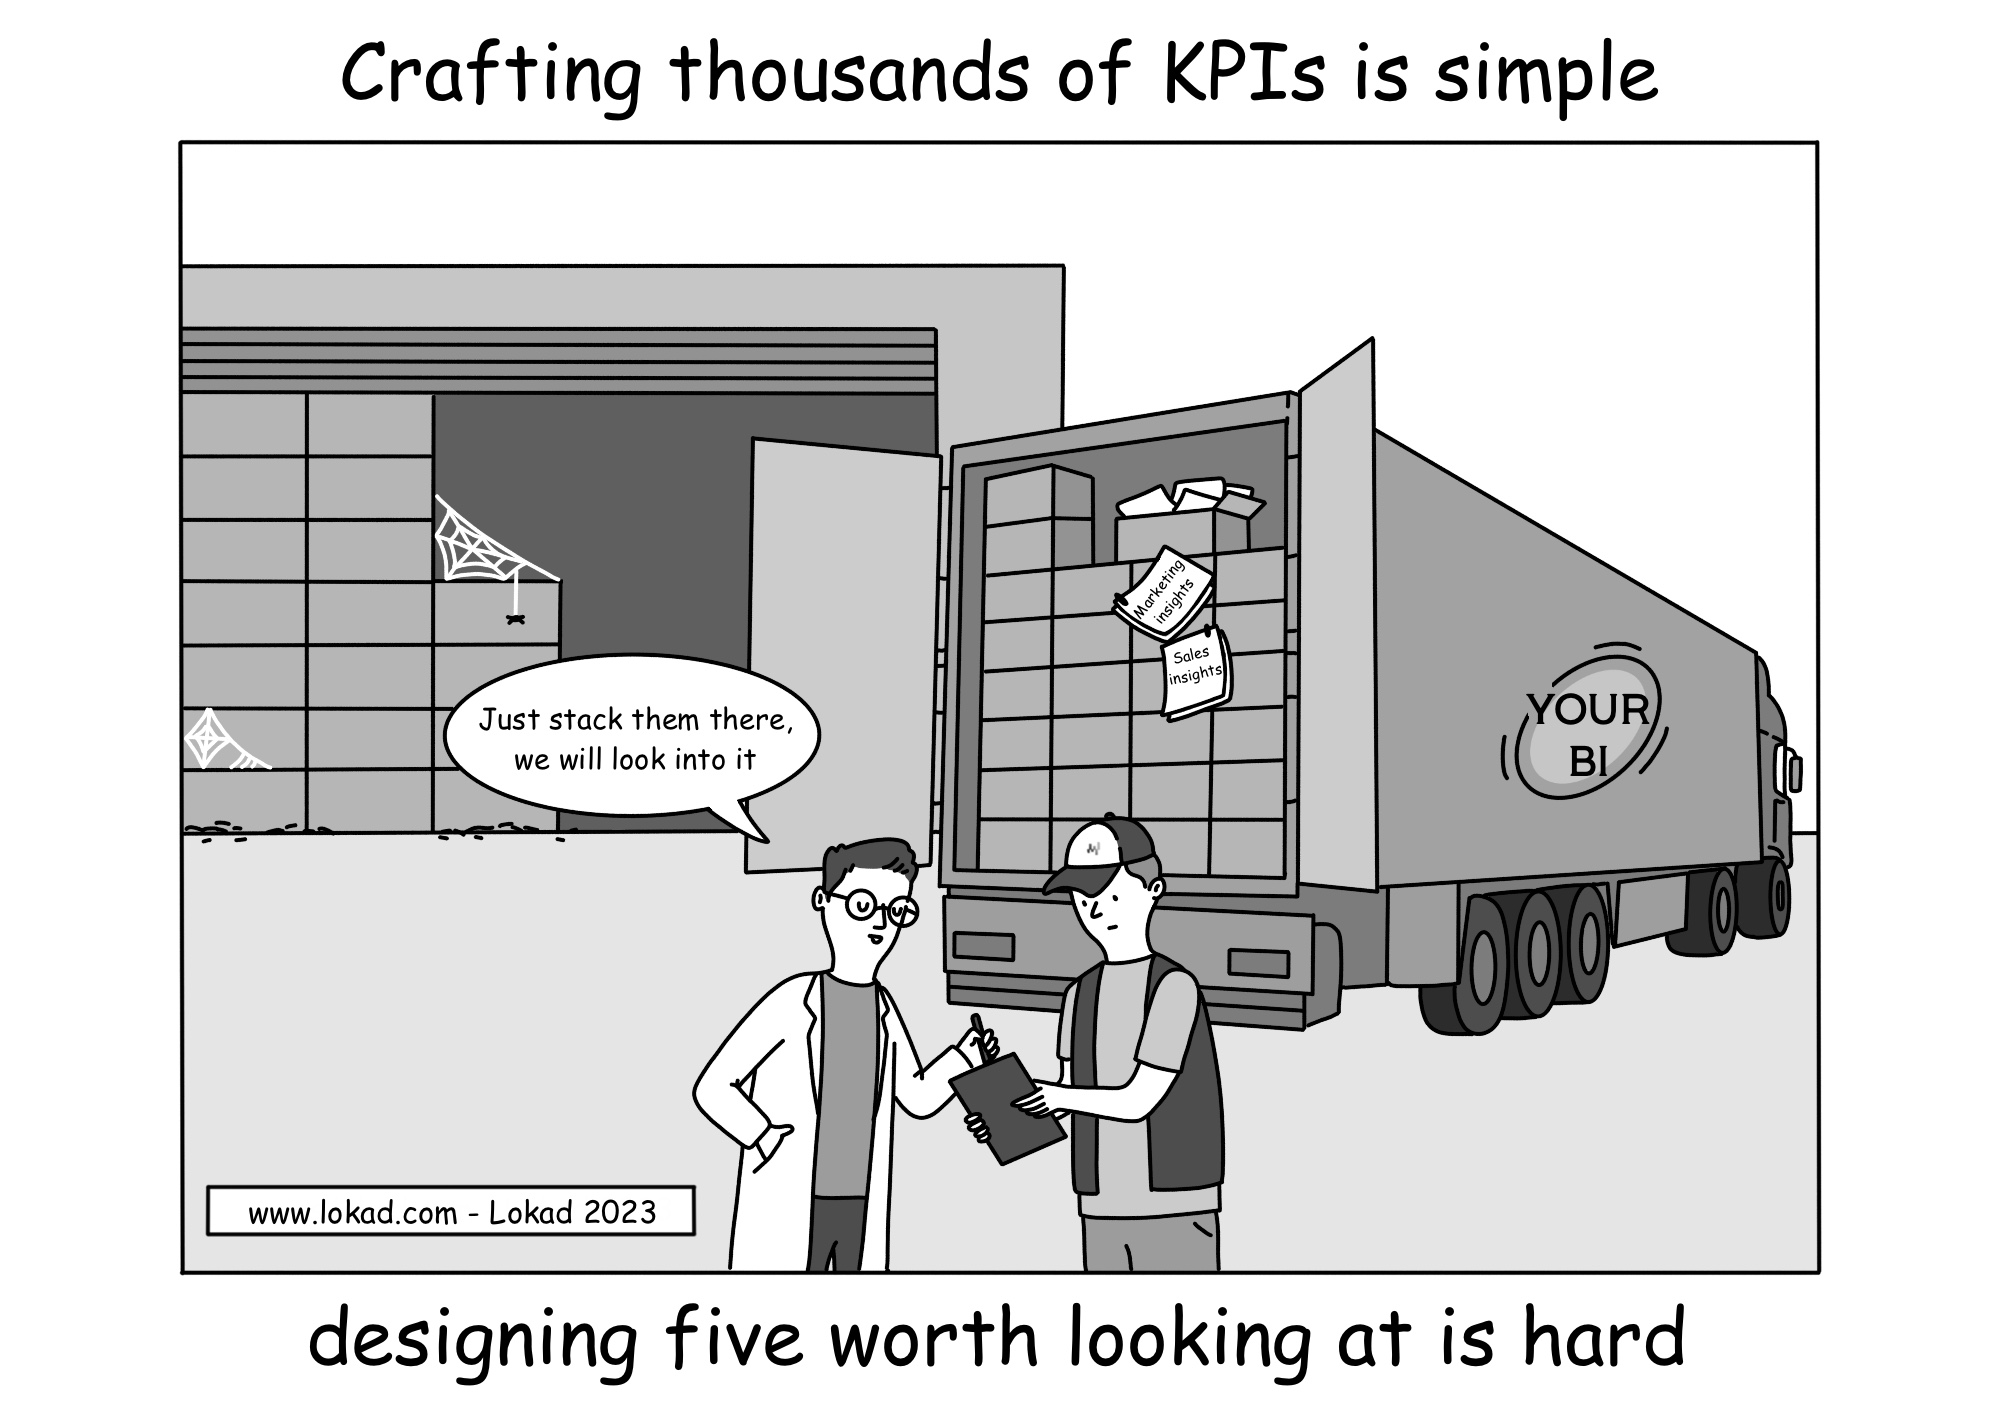 A comic from Lokad's supply chain series titled: Crafting thousands of KPIs is simple, designing five worth looking at is hard. It features two characters, a data scientist in a white coat and a truck driver. They stand behind an open truck, labeled Your BI, which is overflowing  with boxes crammed with paper business reports and charts. Papers labeled Marketing Insights and Sales Insights fall from an open box. The data scientist, signing papers handed to him by the driver, remarks, Just stack them there, we will look into it. In the background, a warehouse is visible, packed with similar boxes and adorned with spider webs, suggesting the reports are rarely, if ever, used.